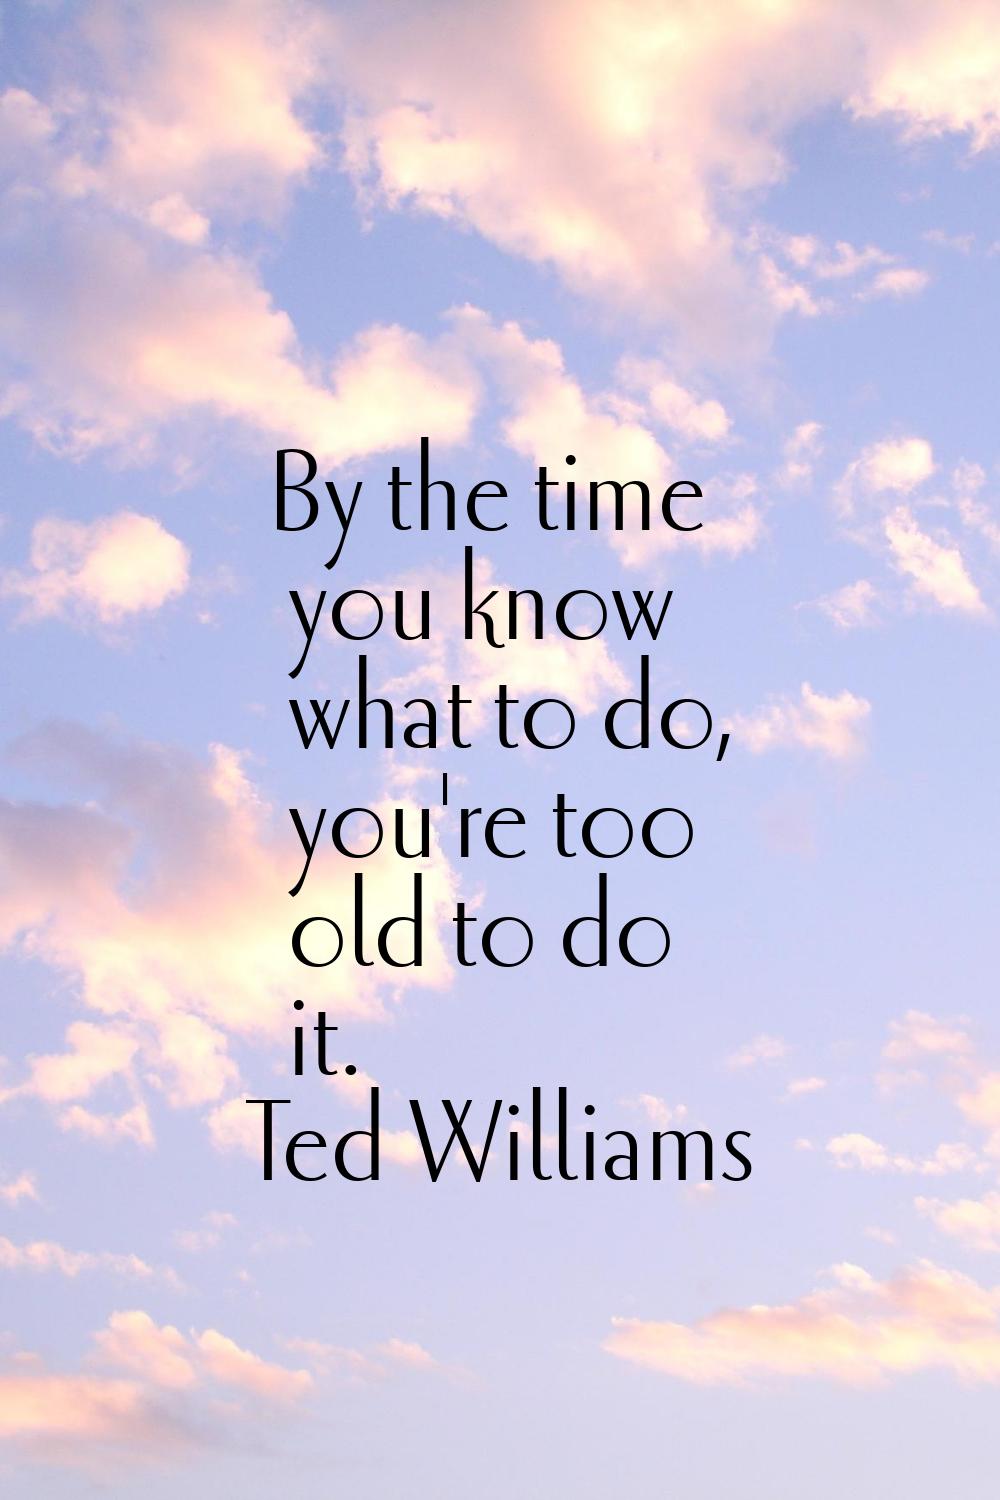 By the time you know what to do, you're too old to do it.